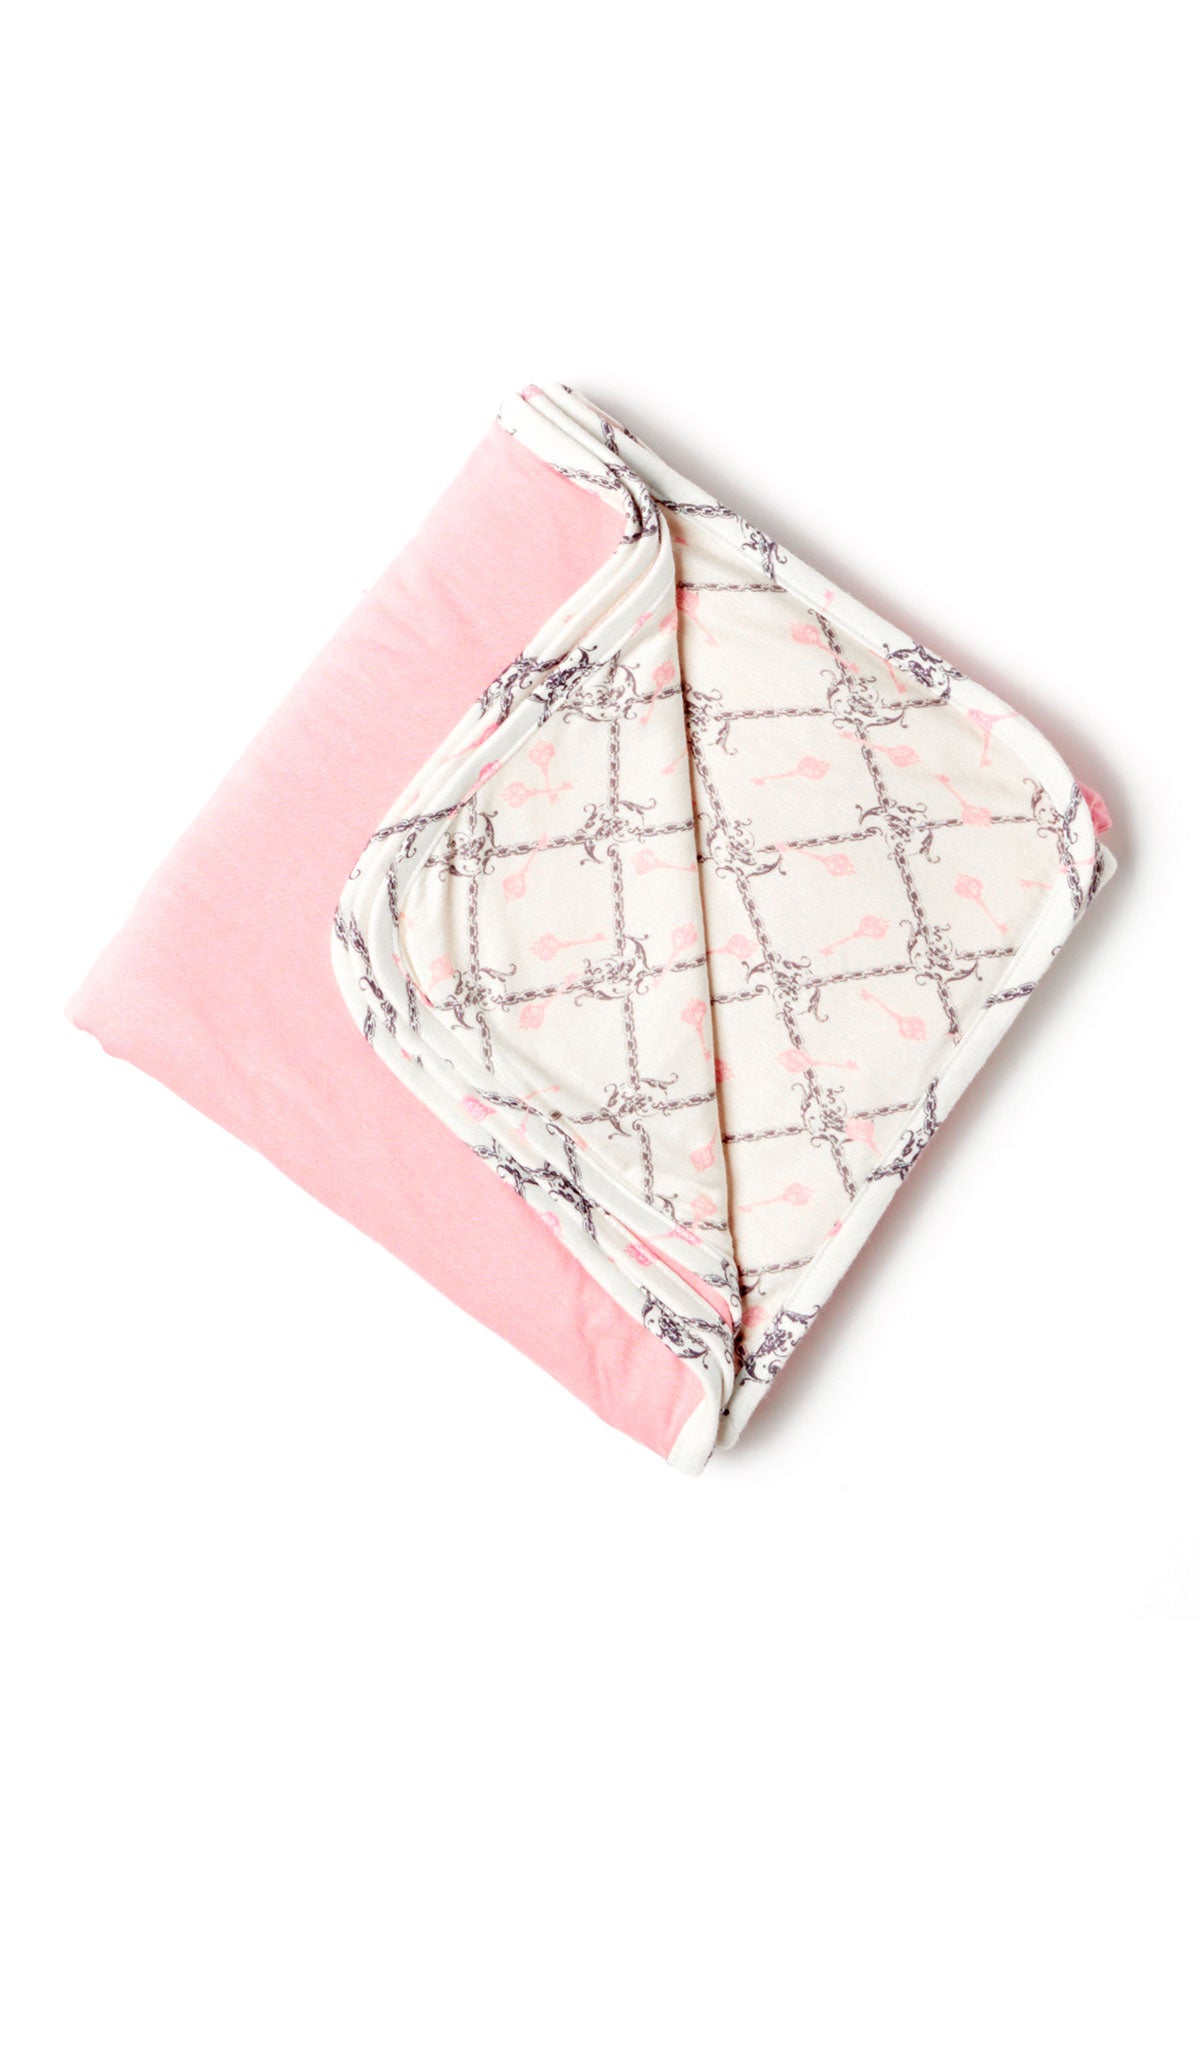 Duchess Swaddle Blanket folded into a square with print showing on one side and reversible contrast solid showing on other side of fold down flap.